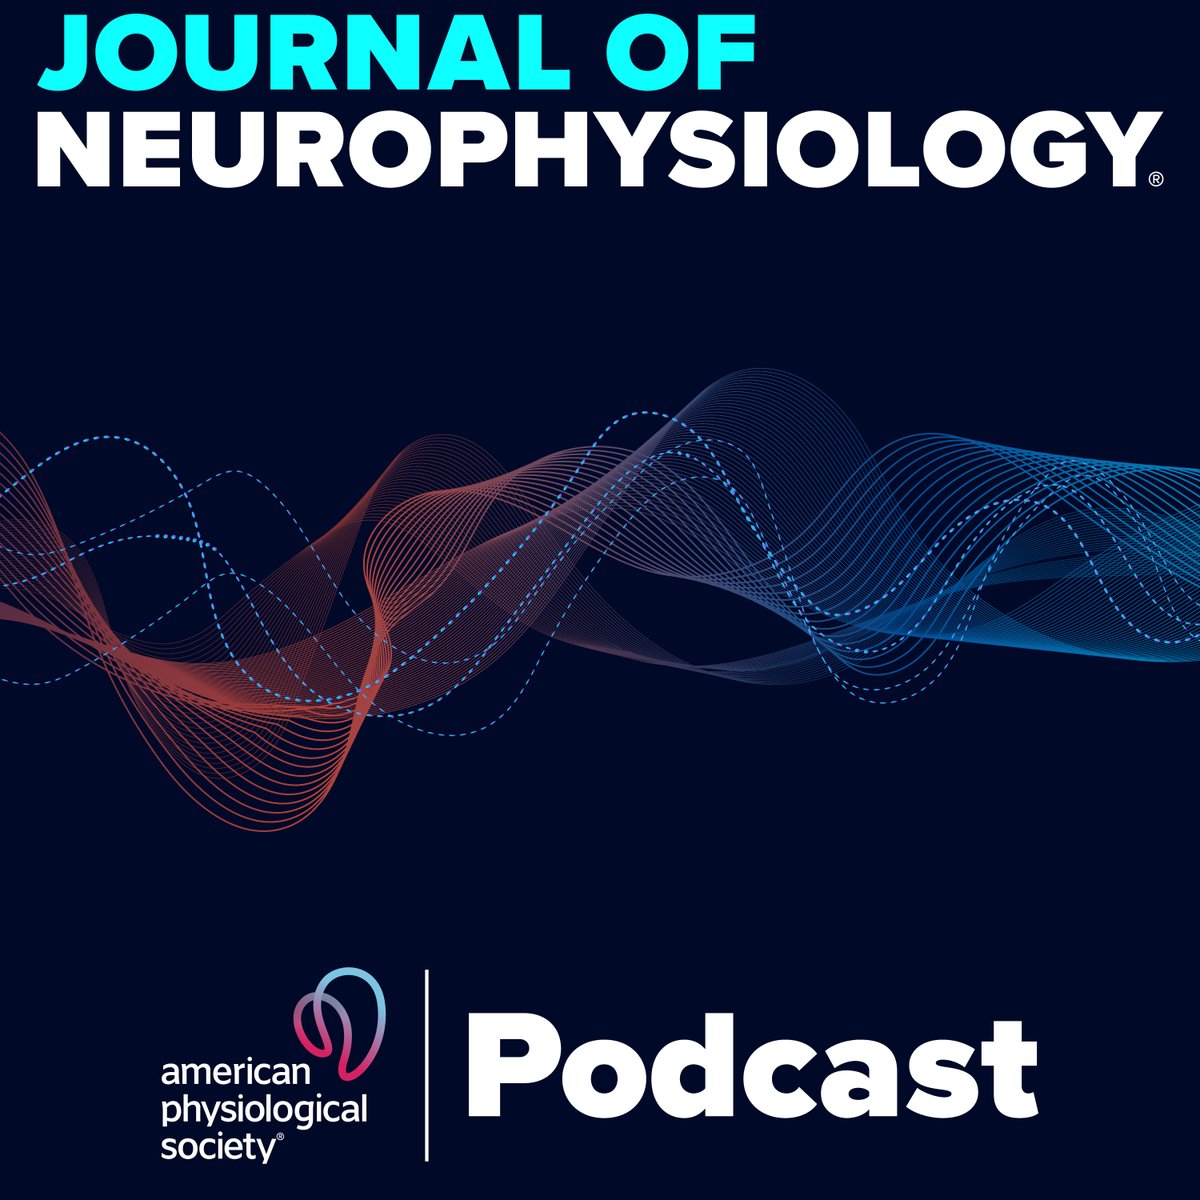 🦀🎙️Fascinating insights into neural networks! Savanna-Rae Fahoum delves into the latest research on #neuromodulation & bidirectional internetwork synapses in crabs. Discover how #neuropeptides facilitate coordination between separate networks. 🎧today! ow.ly/lYPN50RSZ4Q